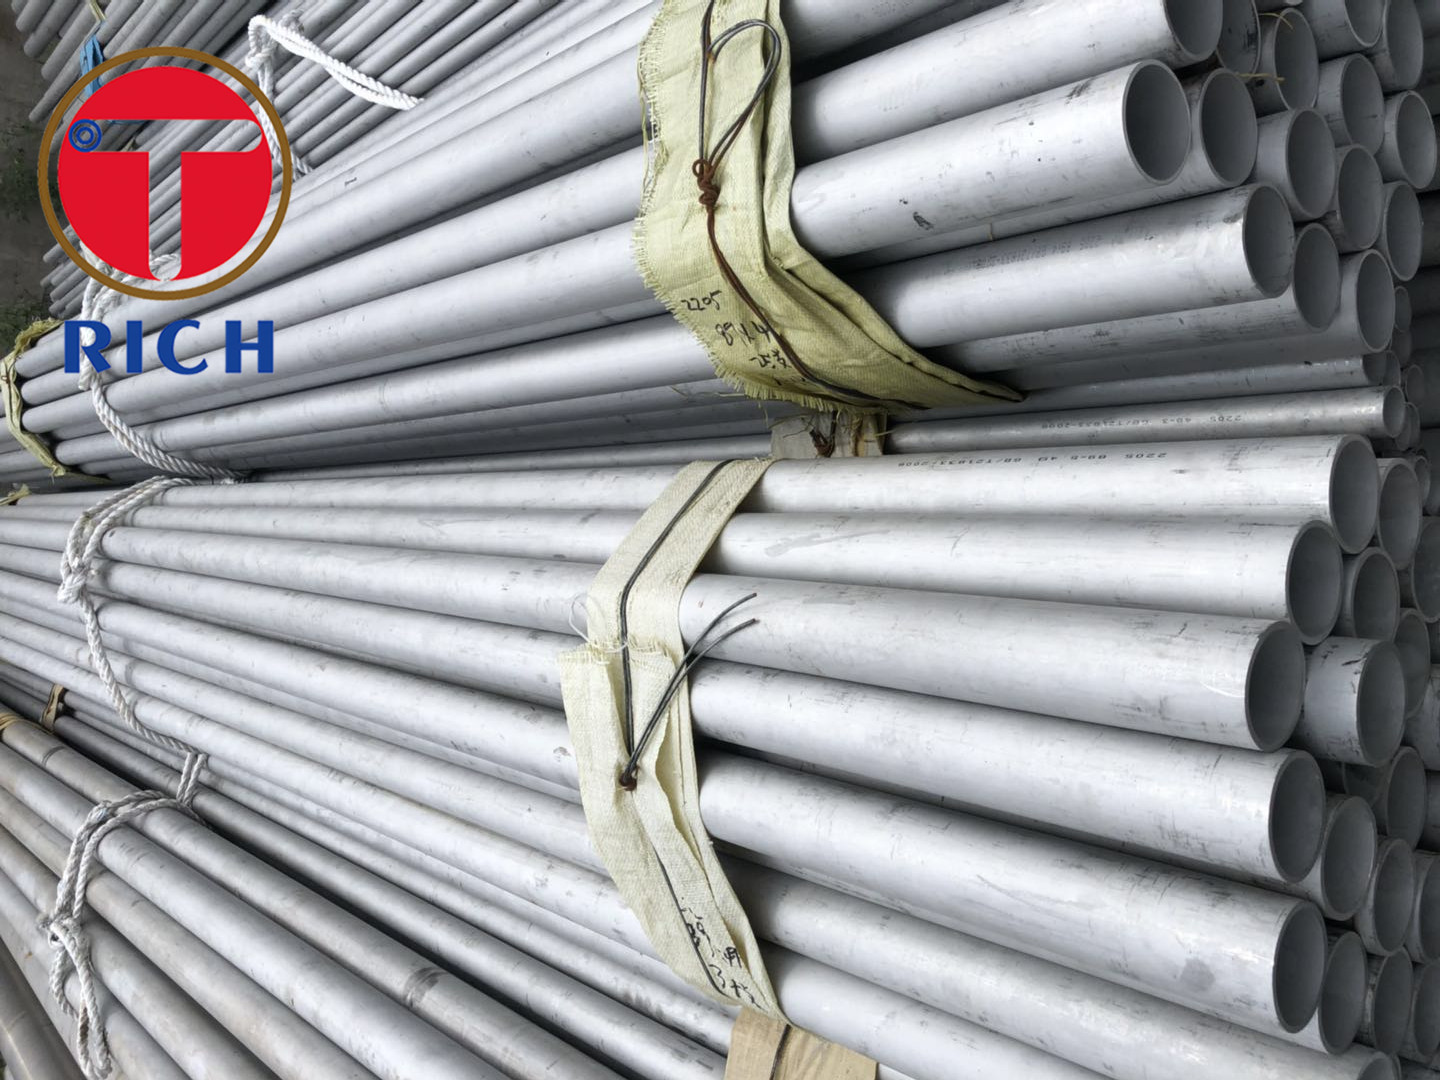 S31083 Duplex 2205 Stainless Steel Seamless Pipe 